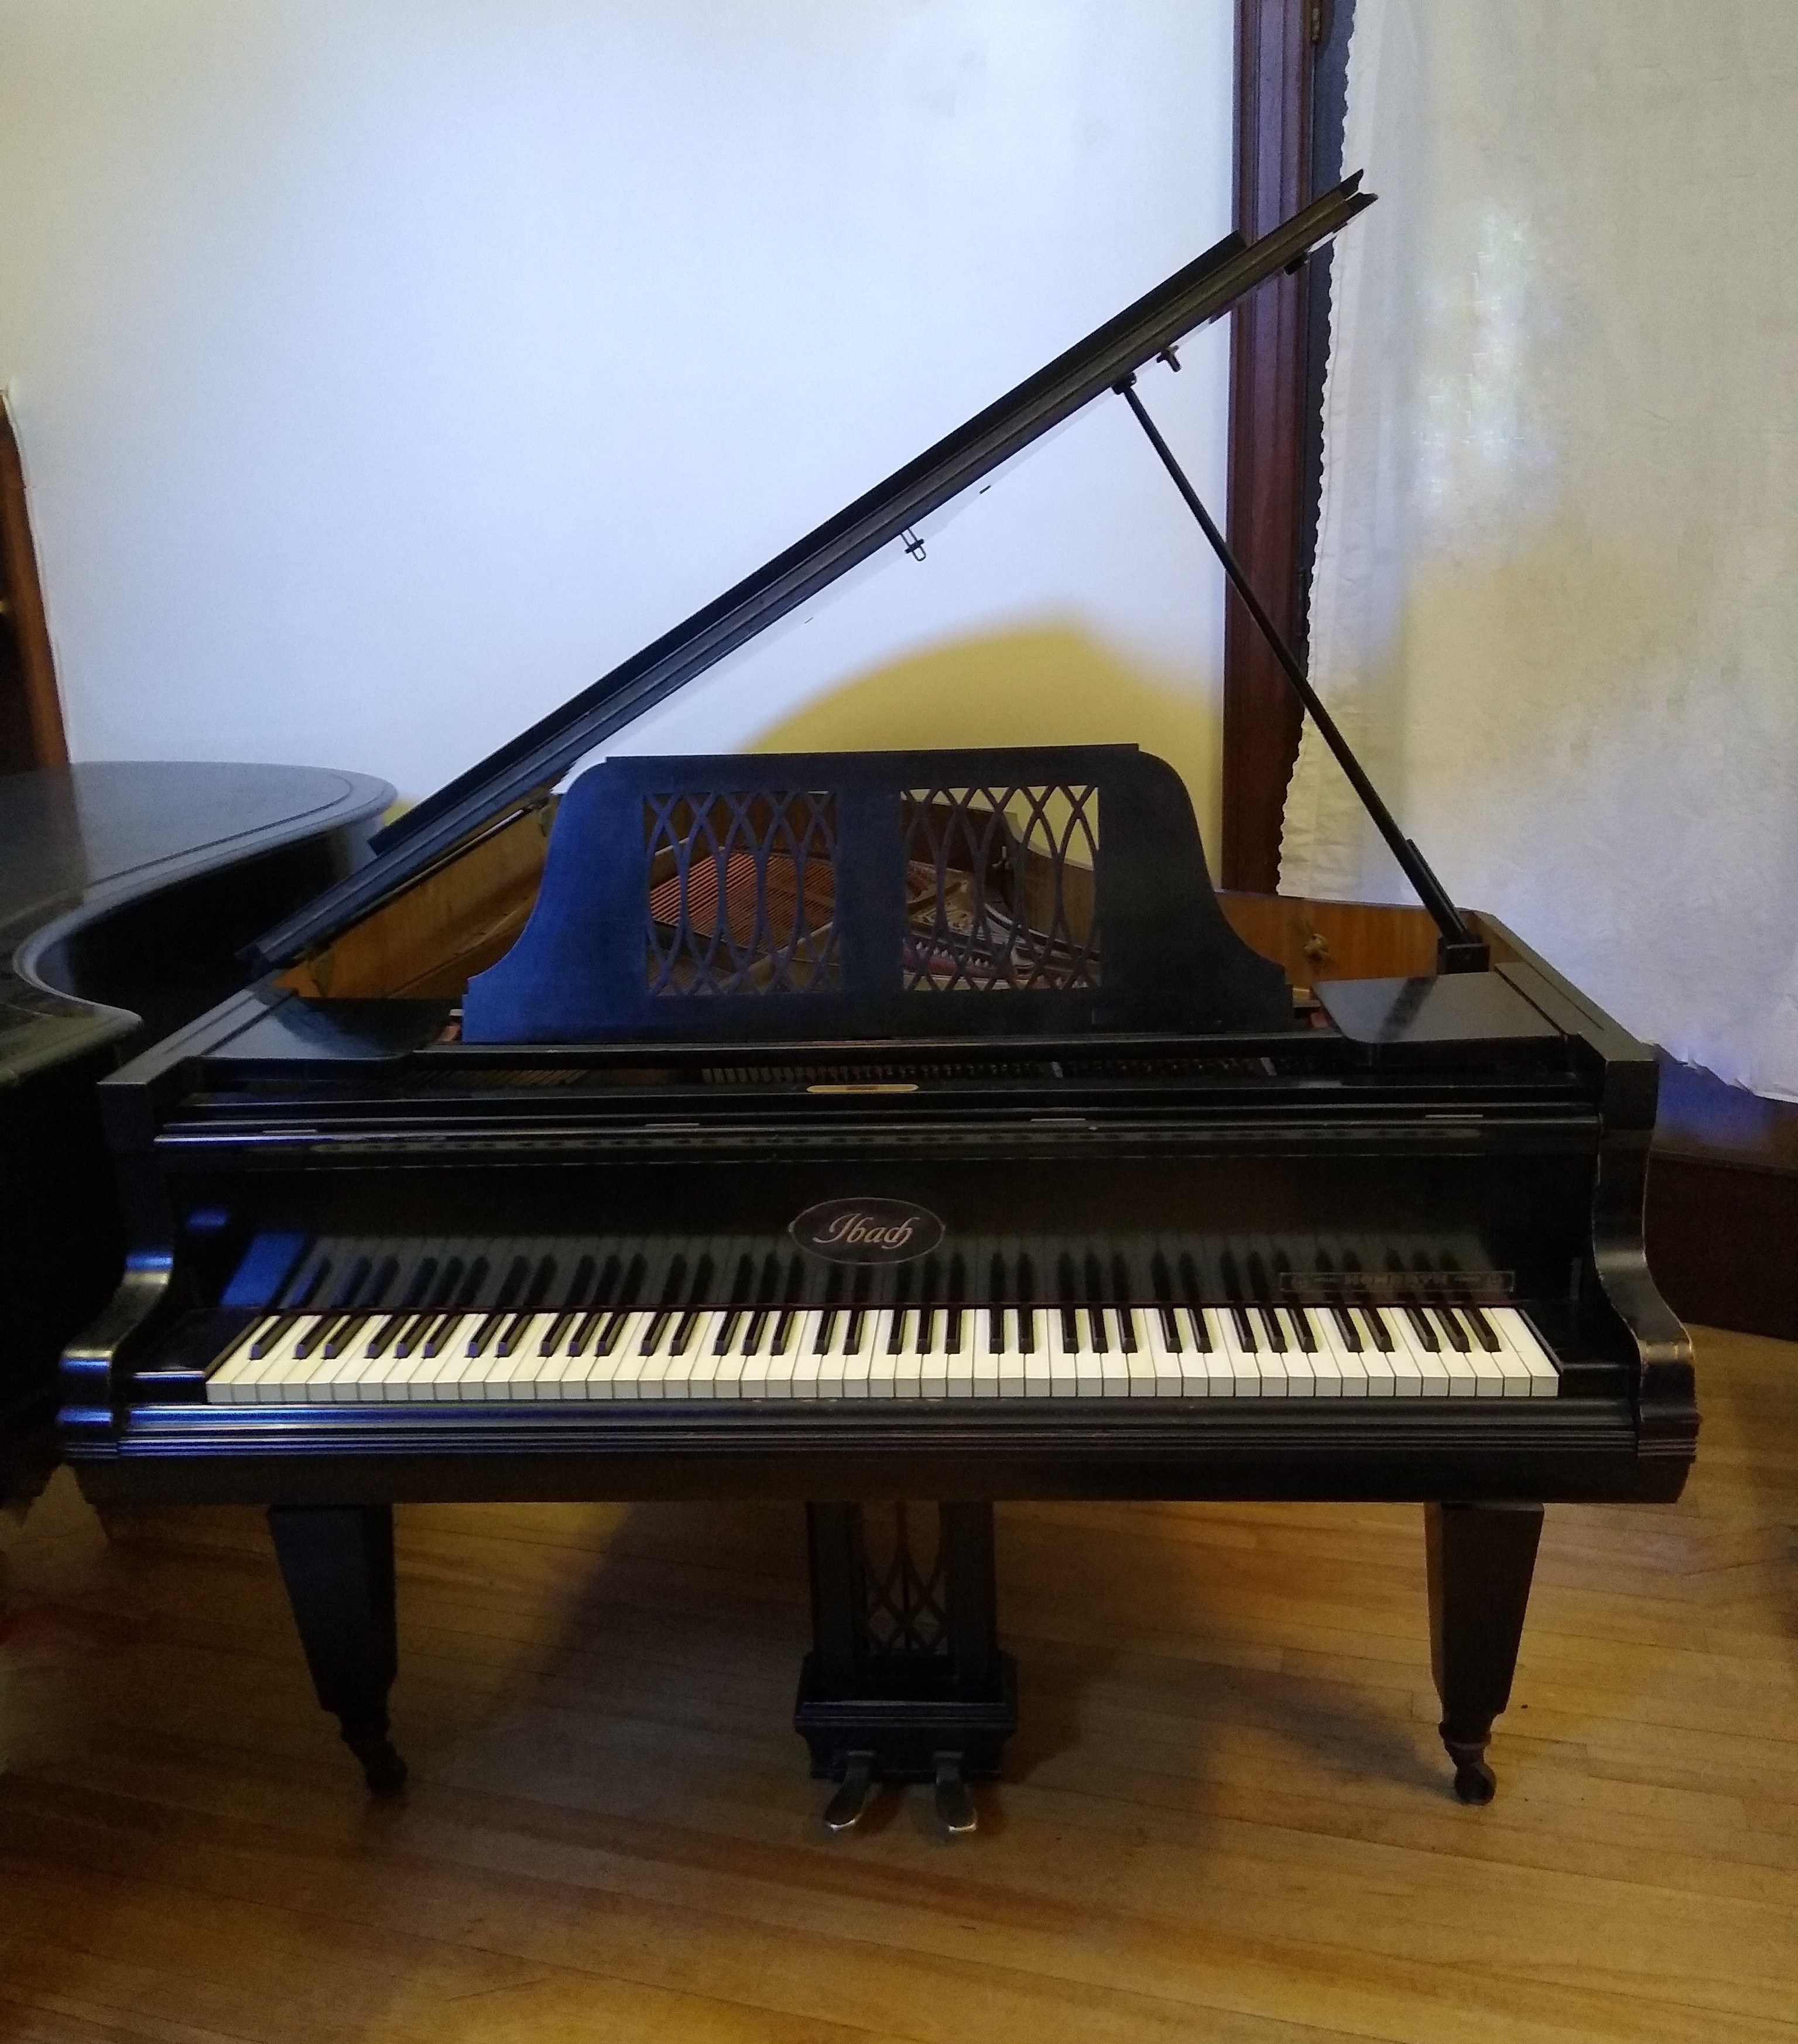 1921 Ibach piano in the Frederick Collection of Historical Pianos